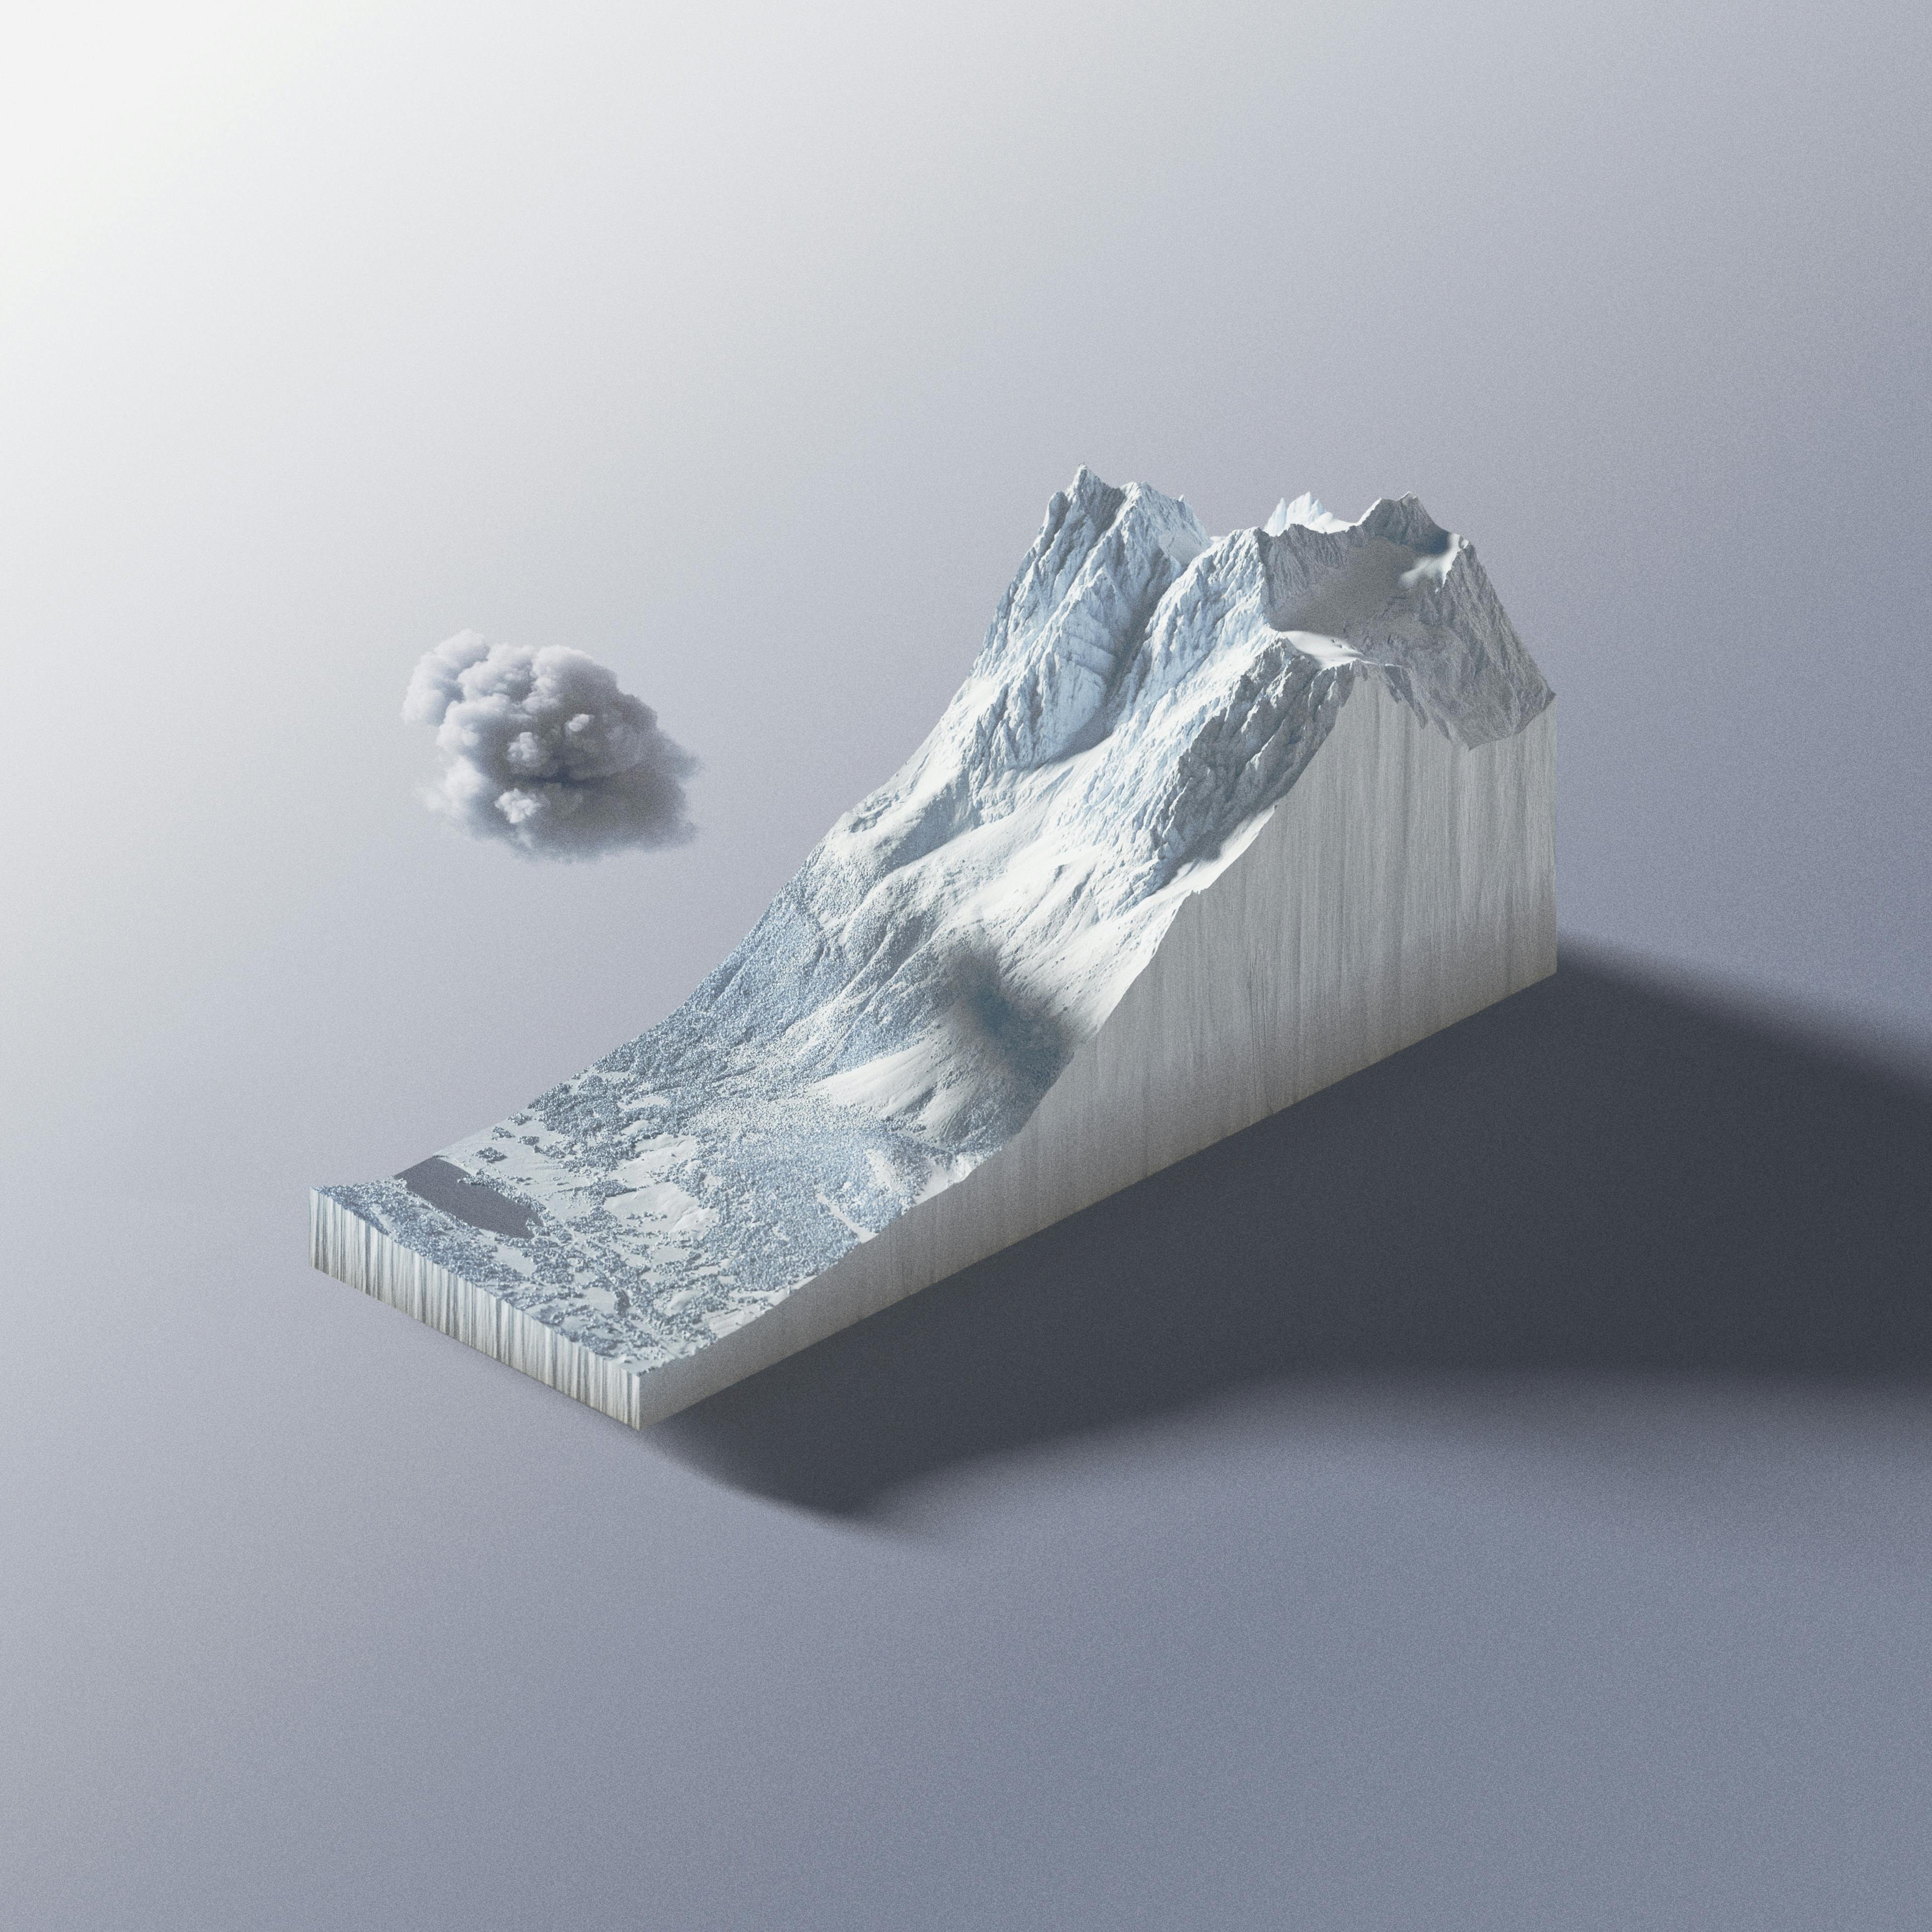 A 3D rendered image of a mountain